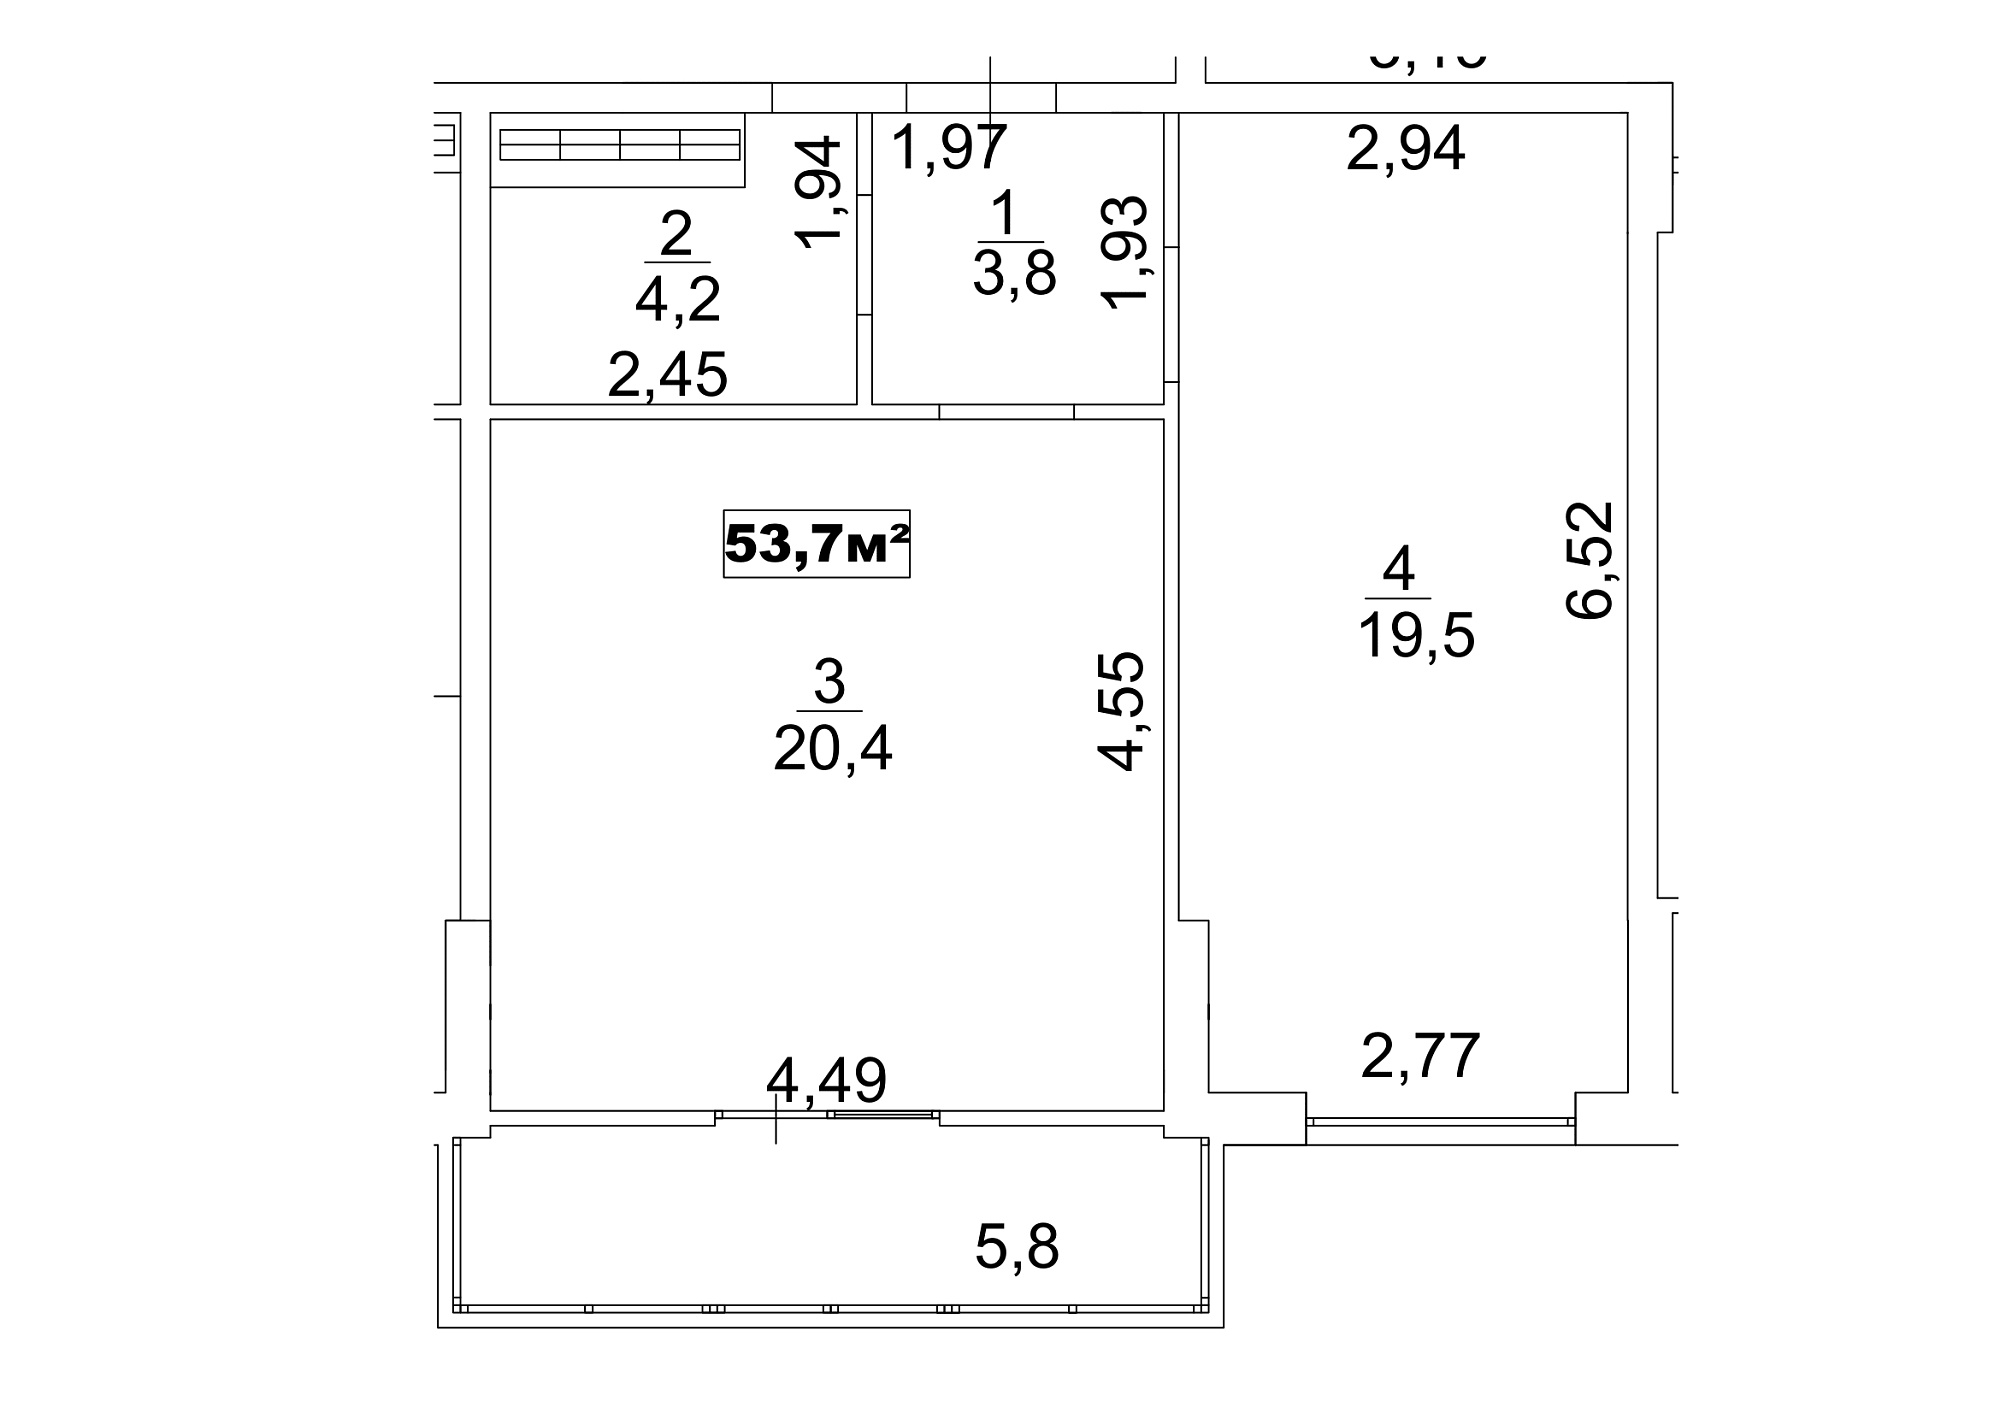 Planning 1-rm flats area 53.7m2, AB-13-02/00014.